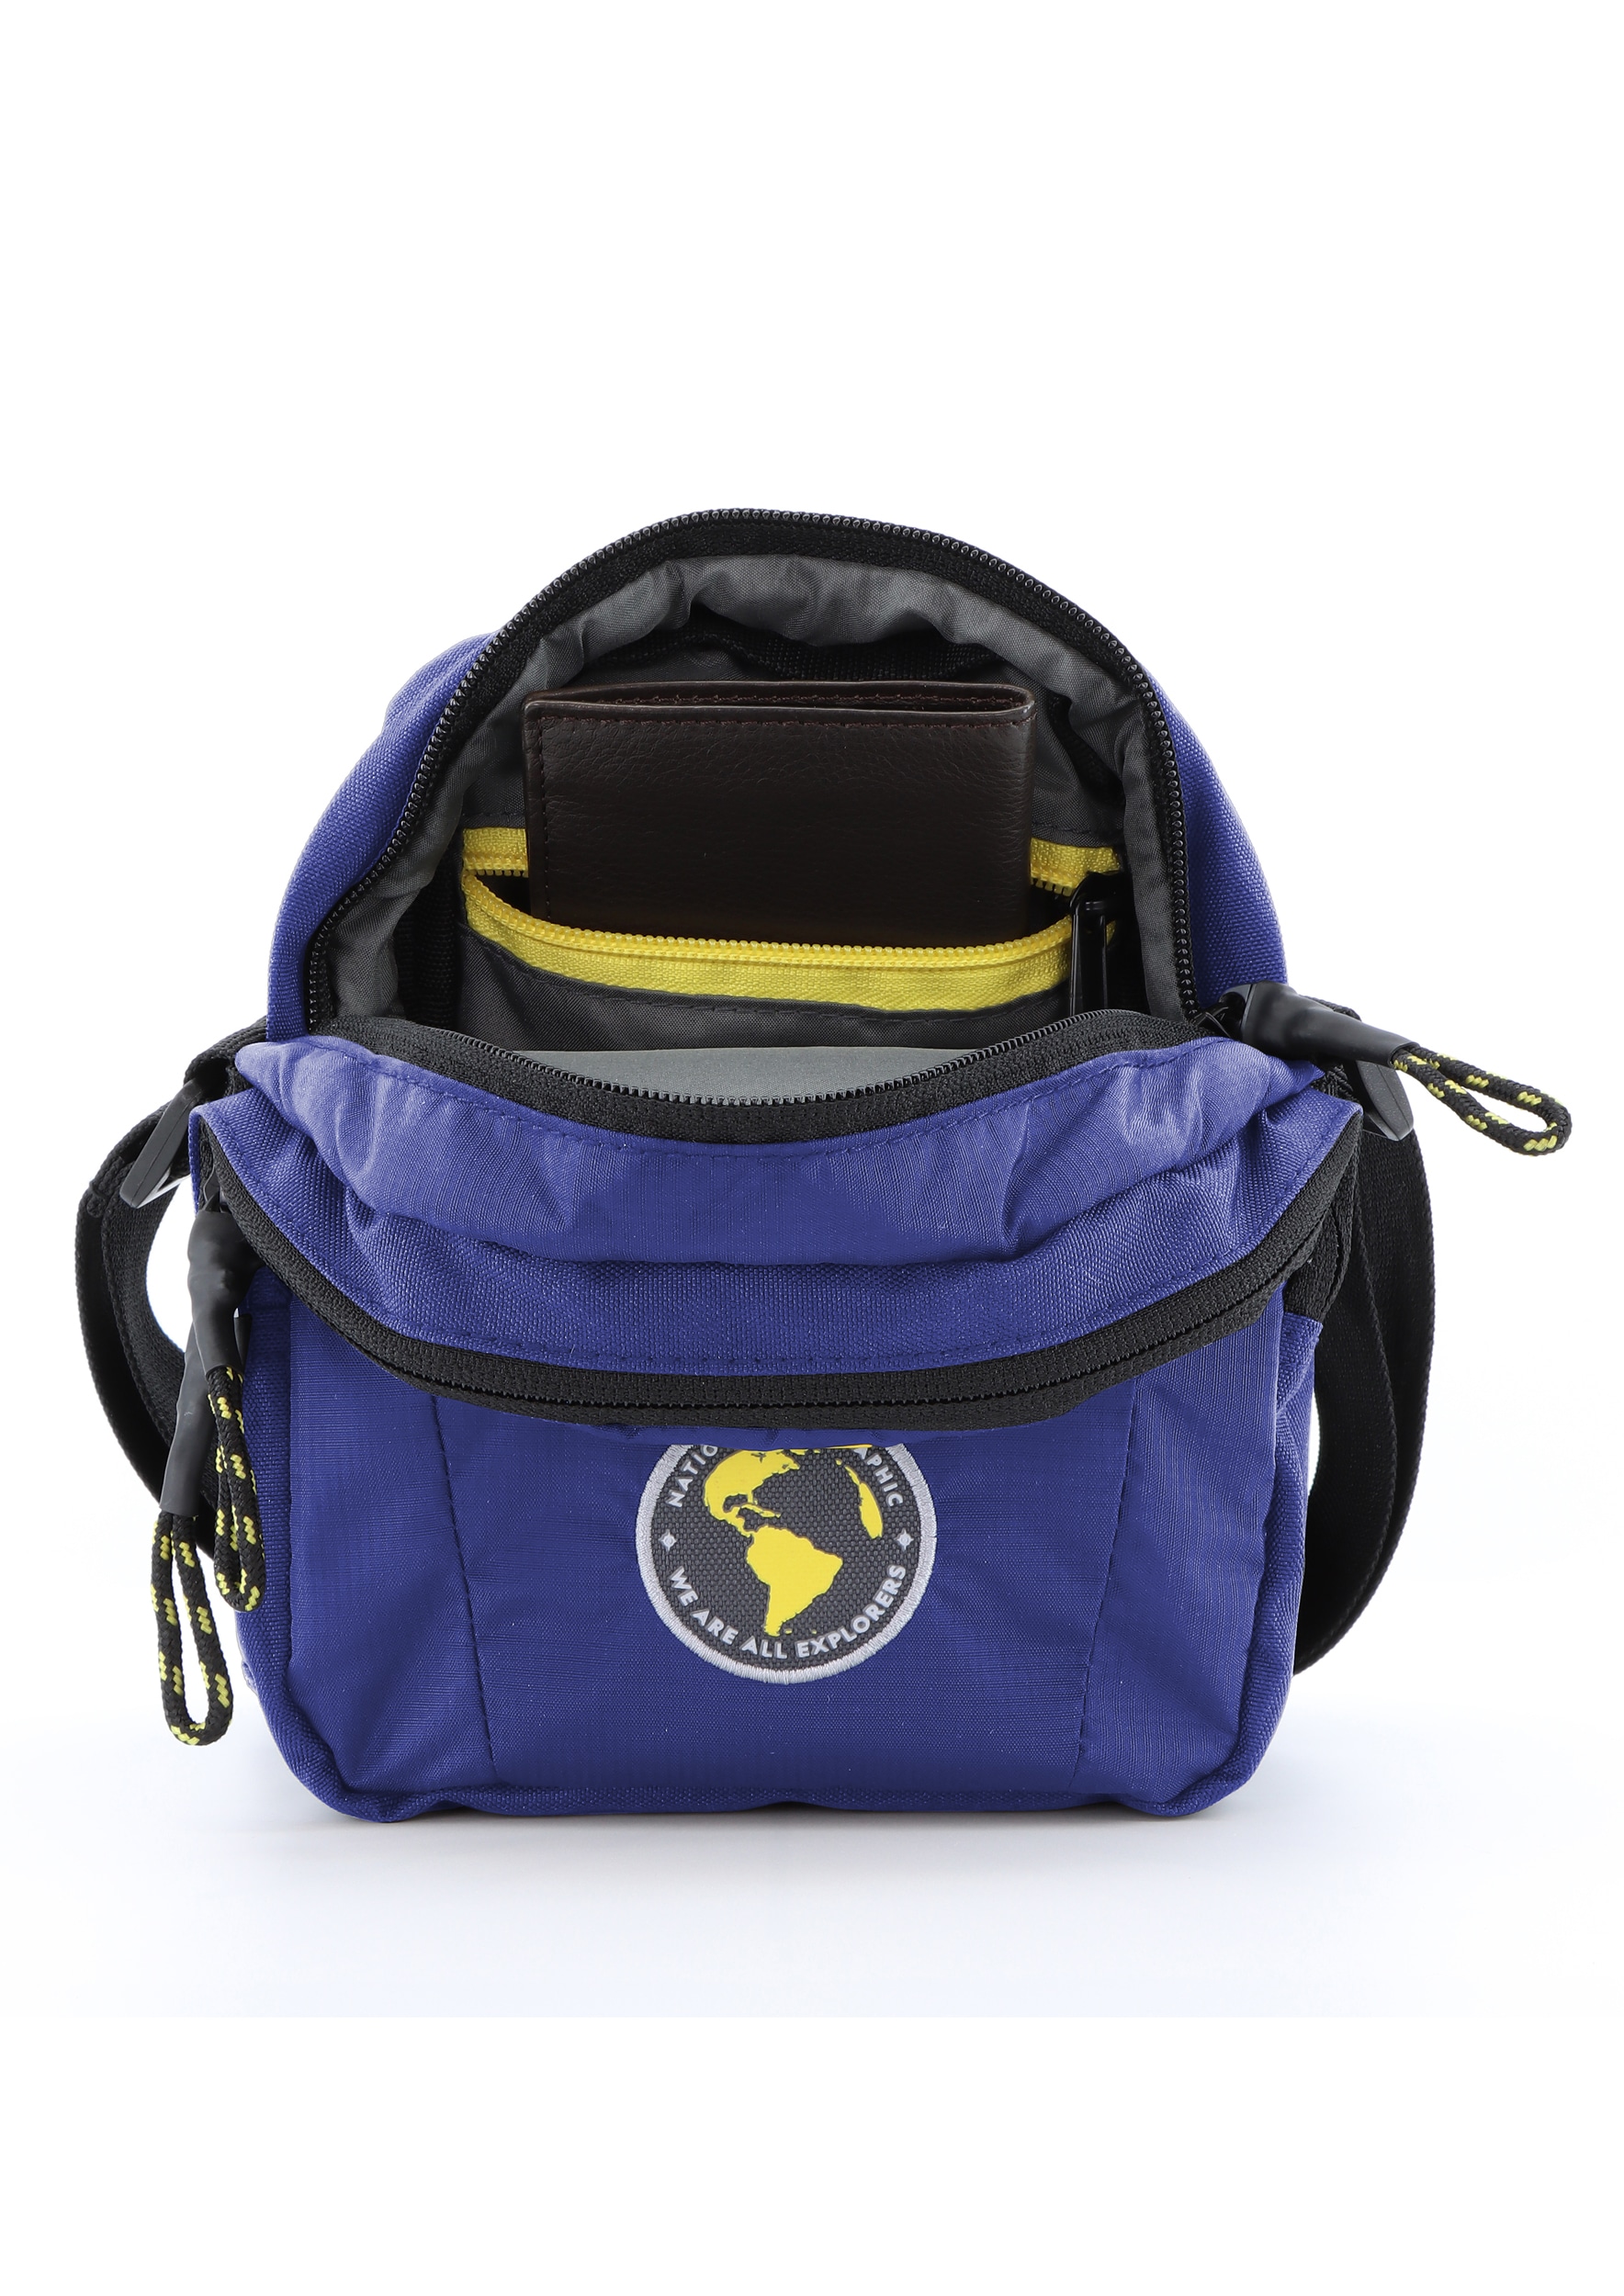 NATIONAL GEOGRAPHIC Schultertasche »New Explorer«, Ripstop